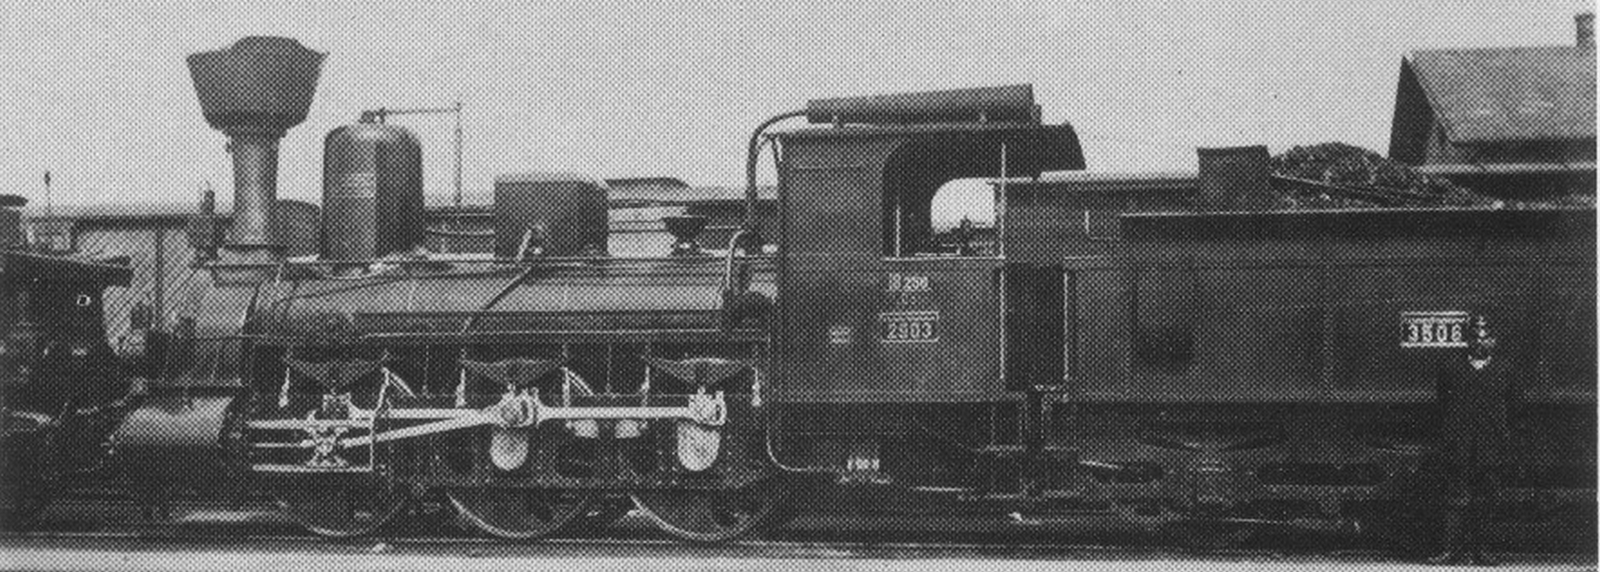 The former No. 11 “Unzmarkt”, here as kkStB 29.03, later 929.07